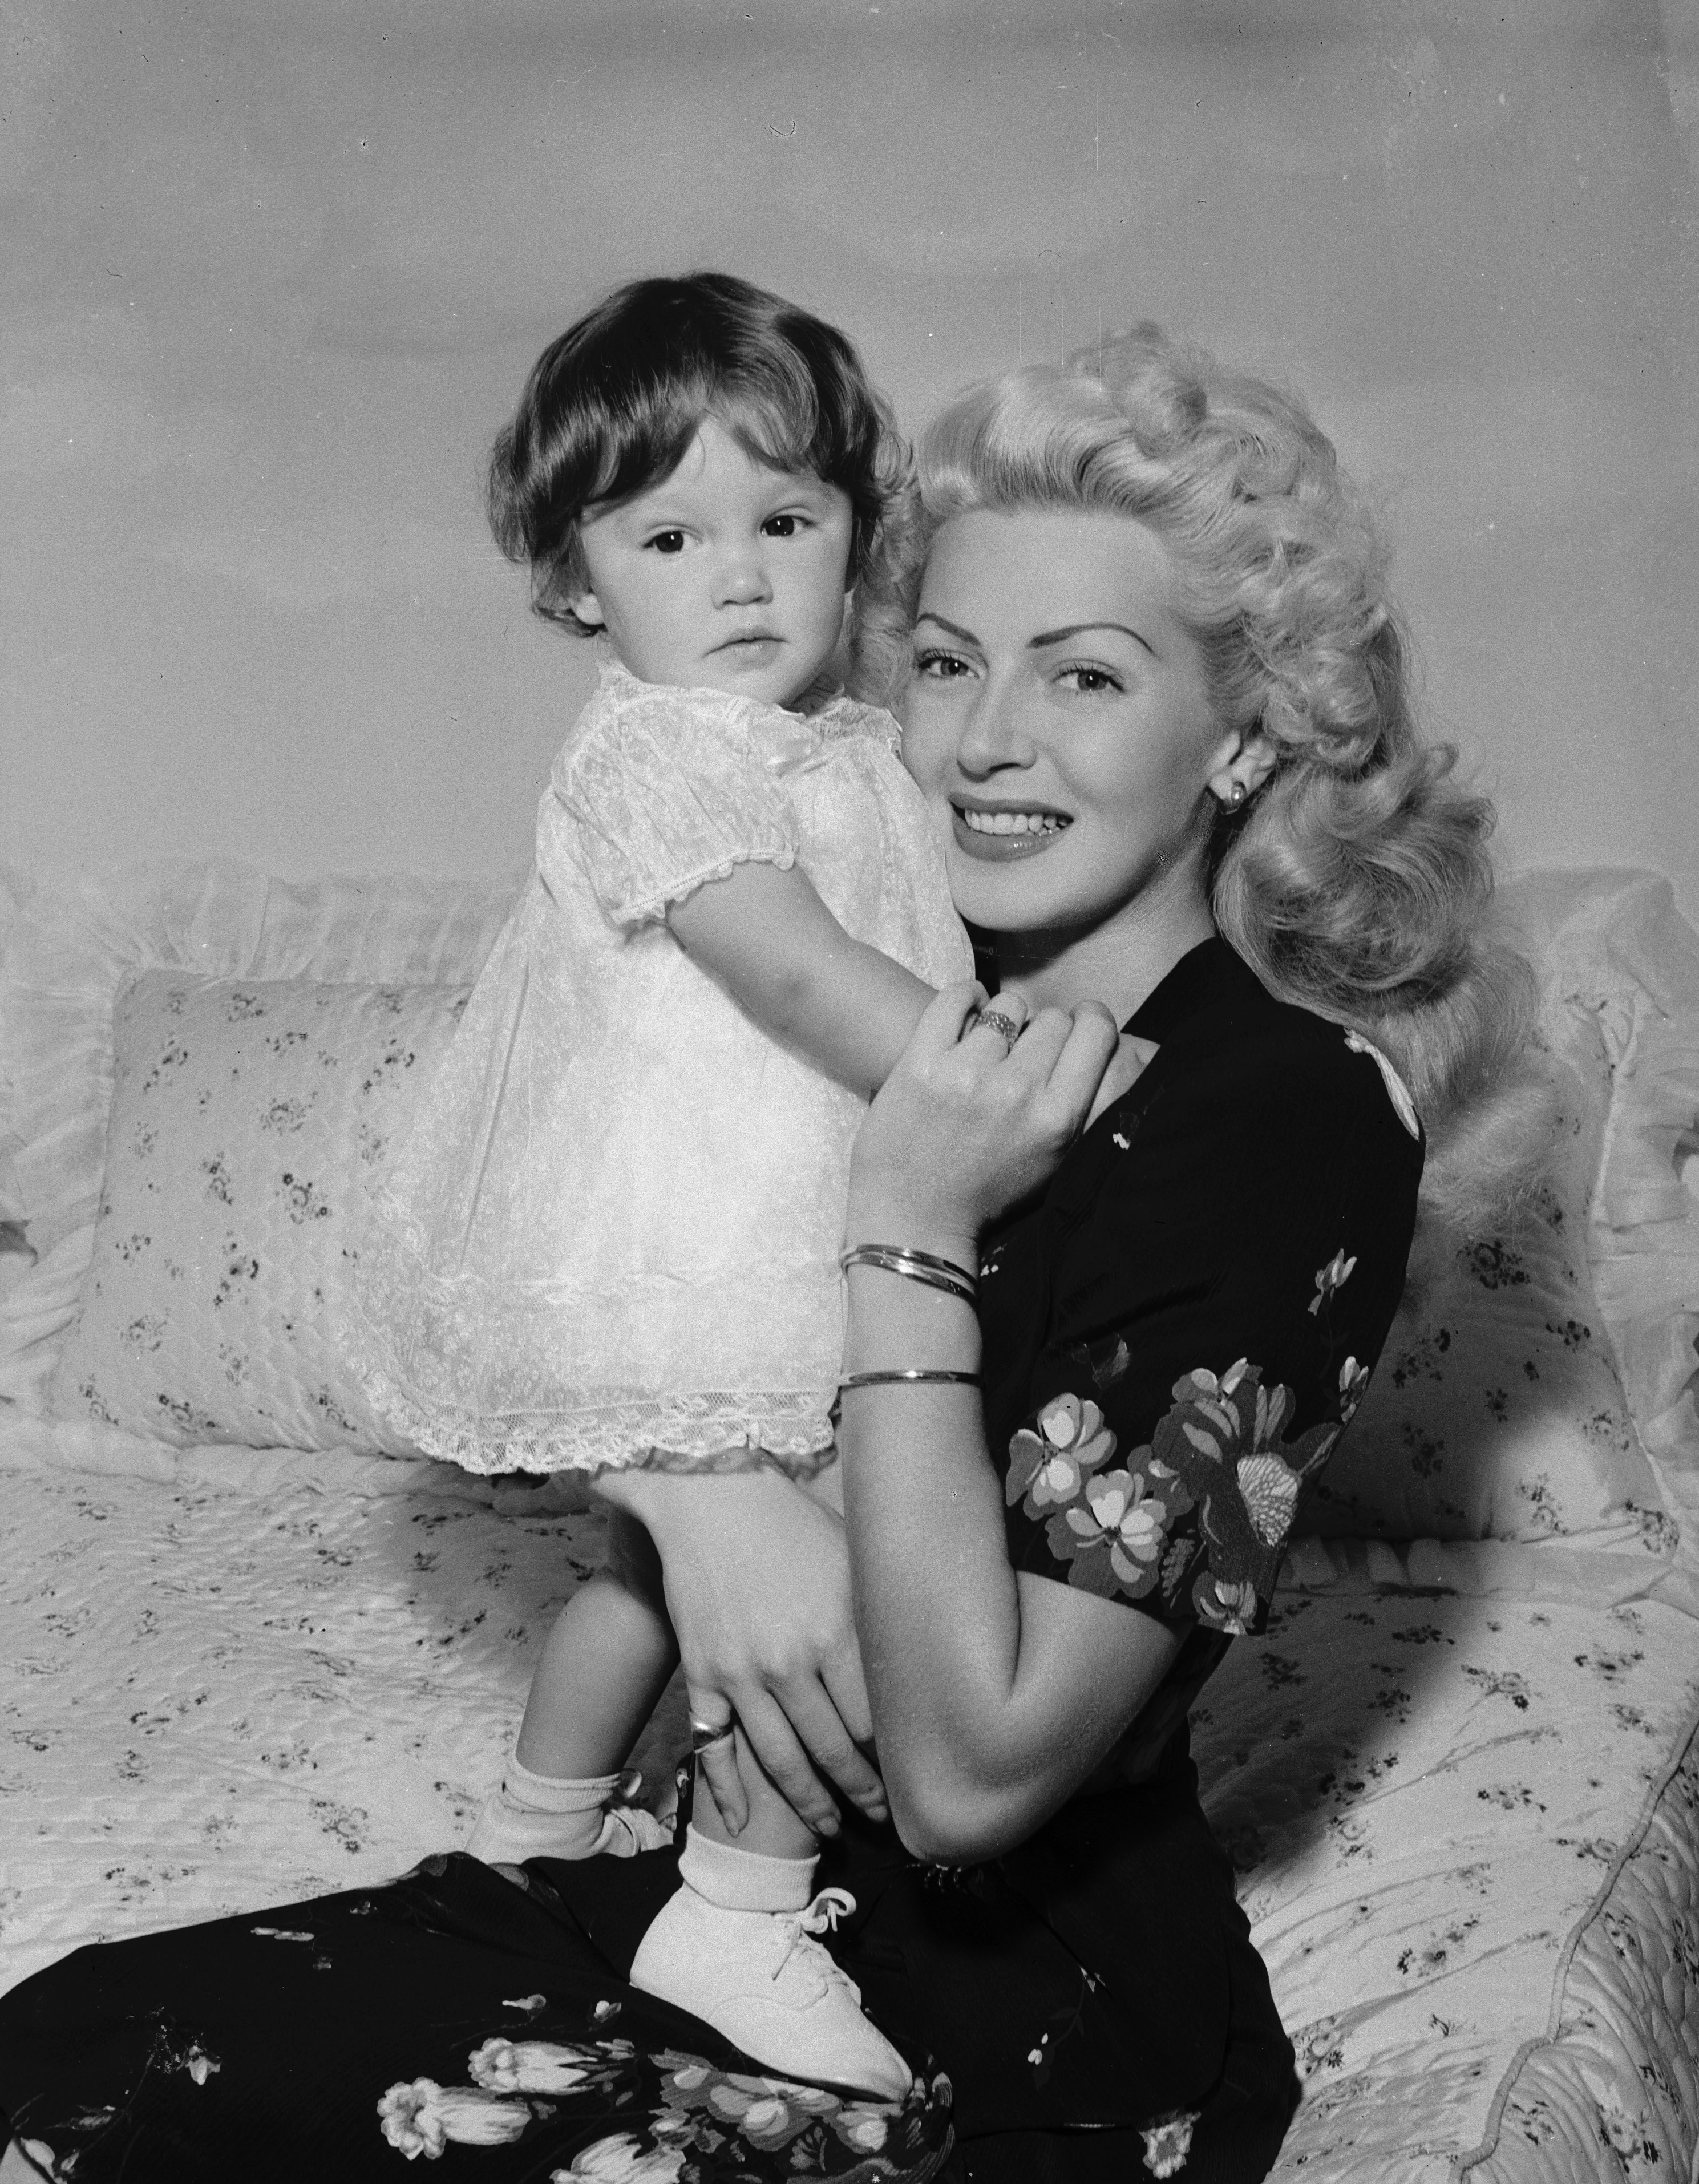  Hollywood actress Lana Turner with her daughter Cheryl Crane on July 25, 1944 | Photo: Getty Images